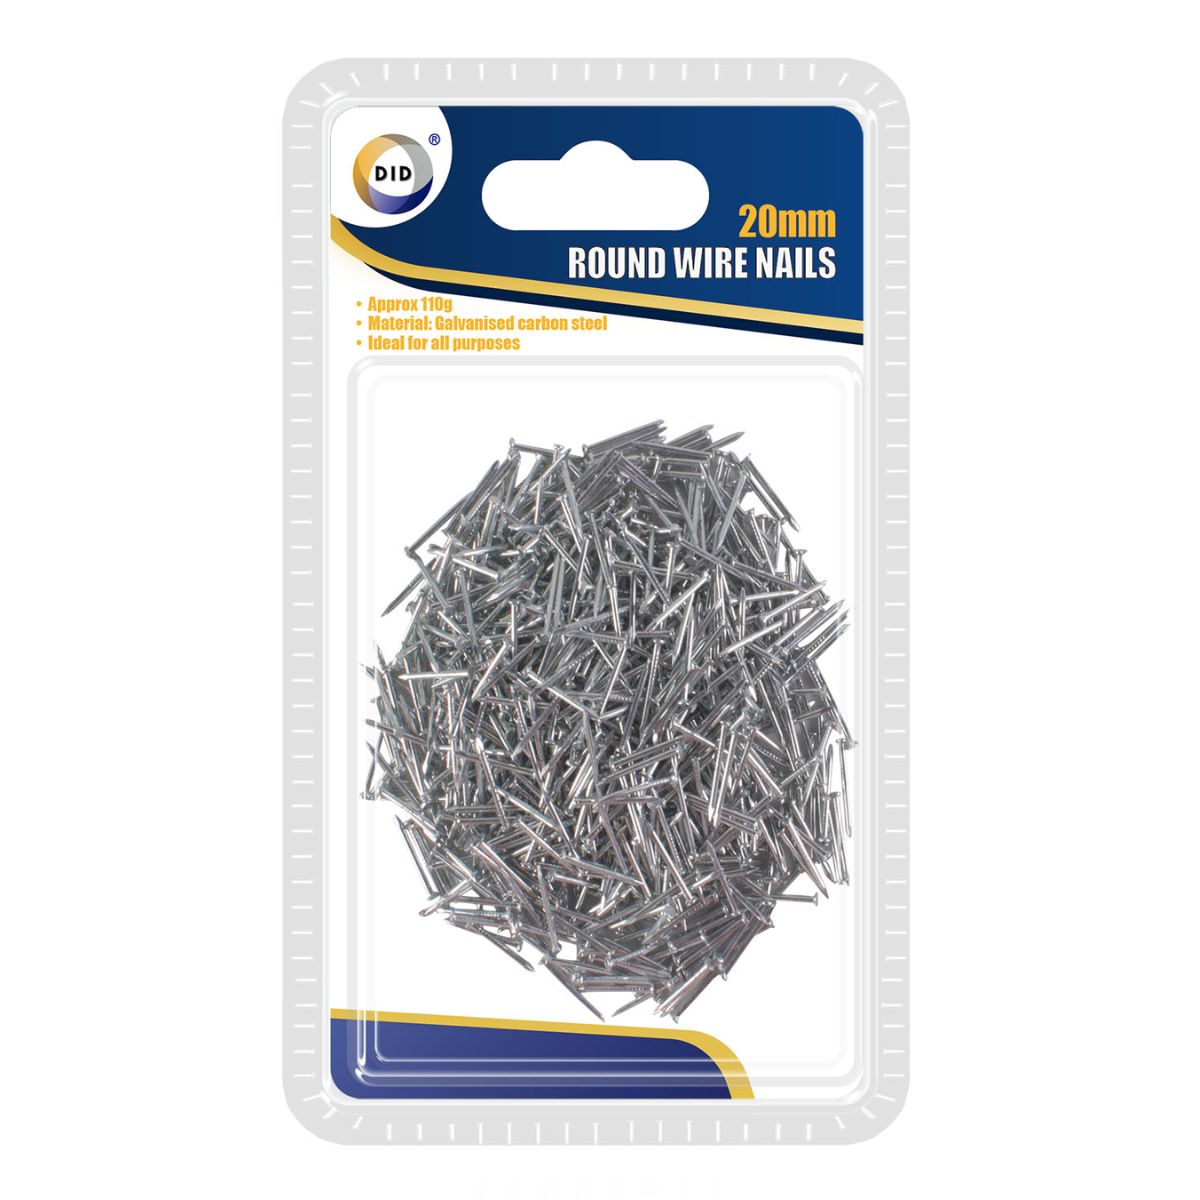 Plastic packaging containing a pile of DID - Round Wire Nails 20mm made of galvanized carbon steel, labeled for all purposes.